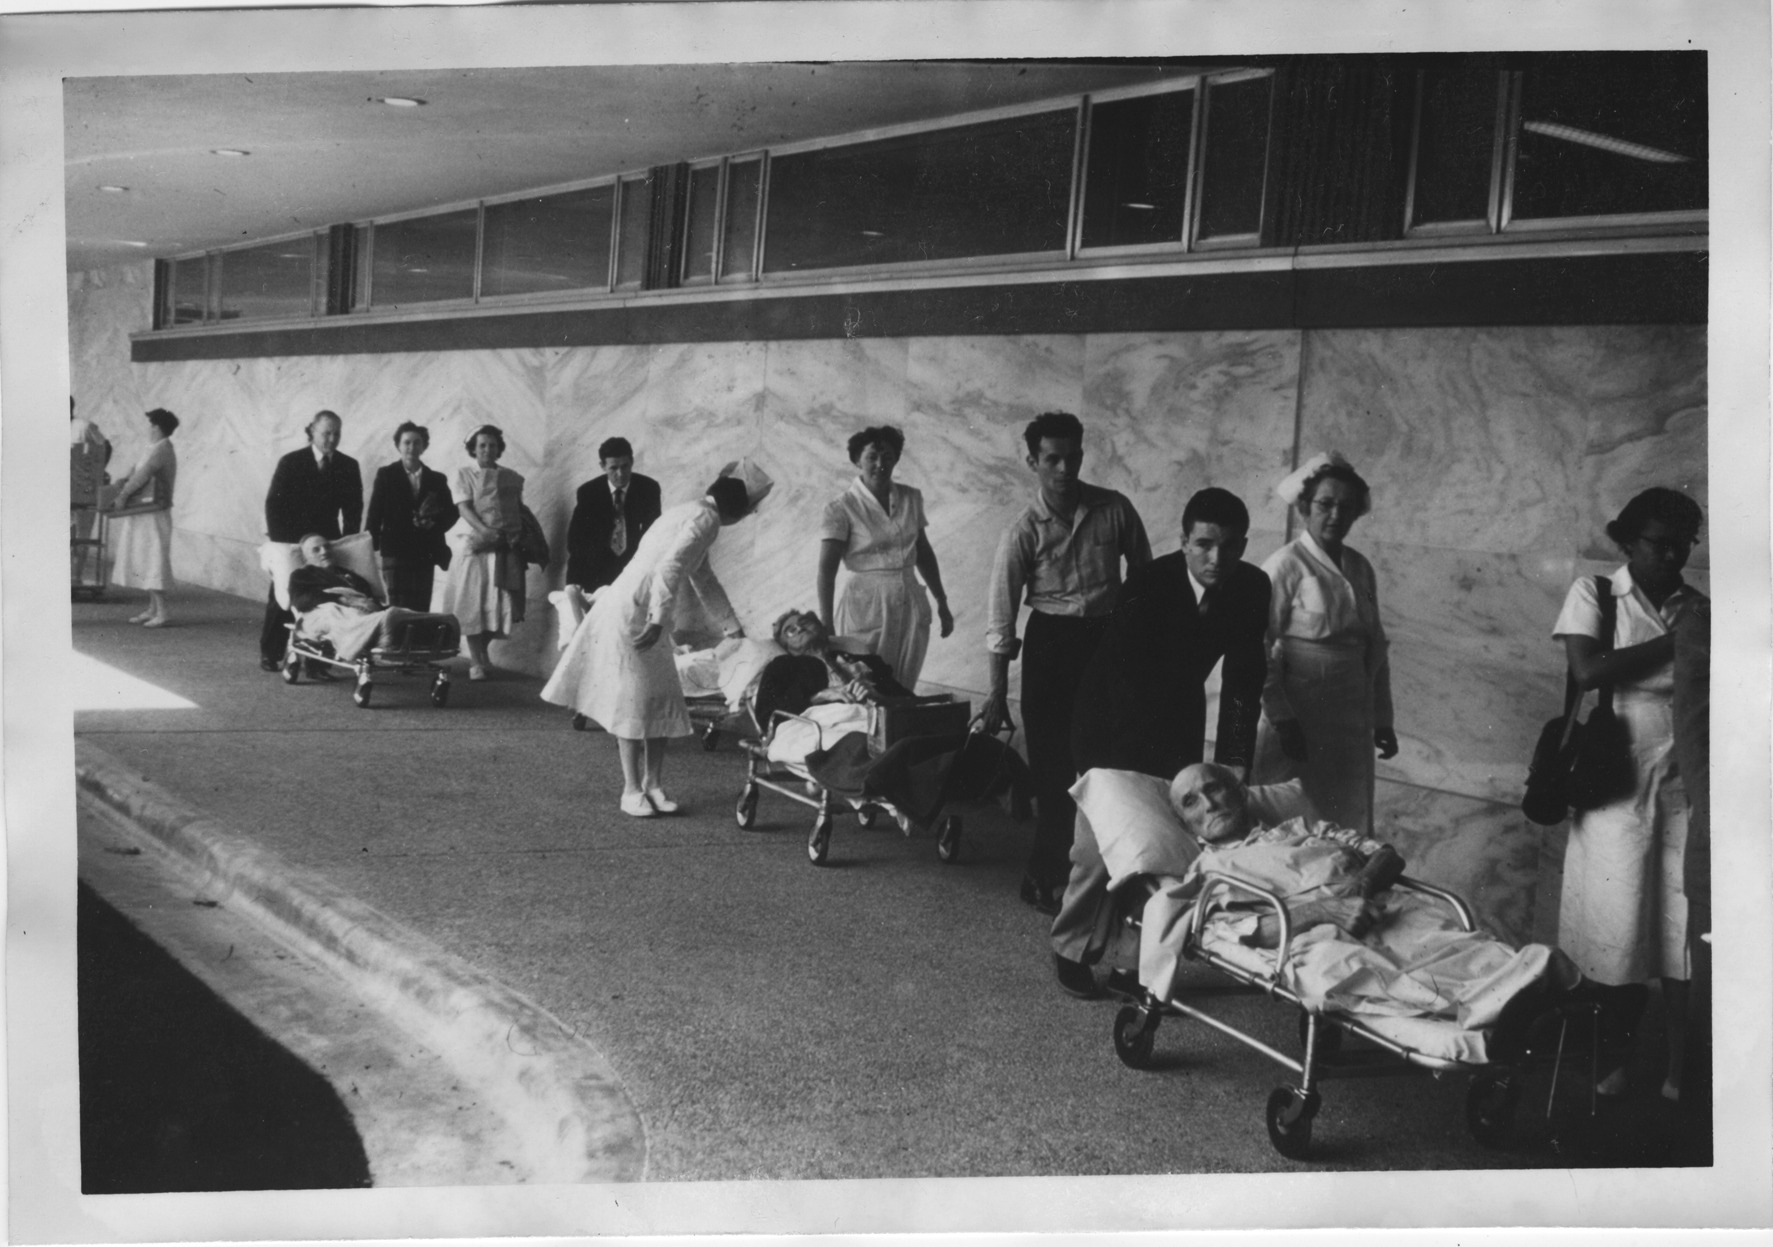 Patients being wheeled into the new hospital, 1954 (MS070 Series VIII, Box 185, folder 5)